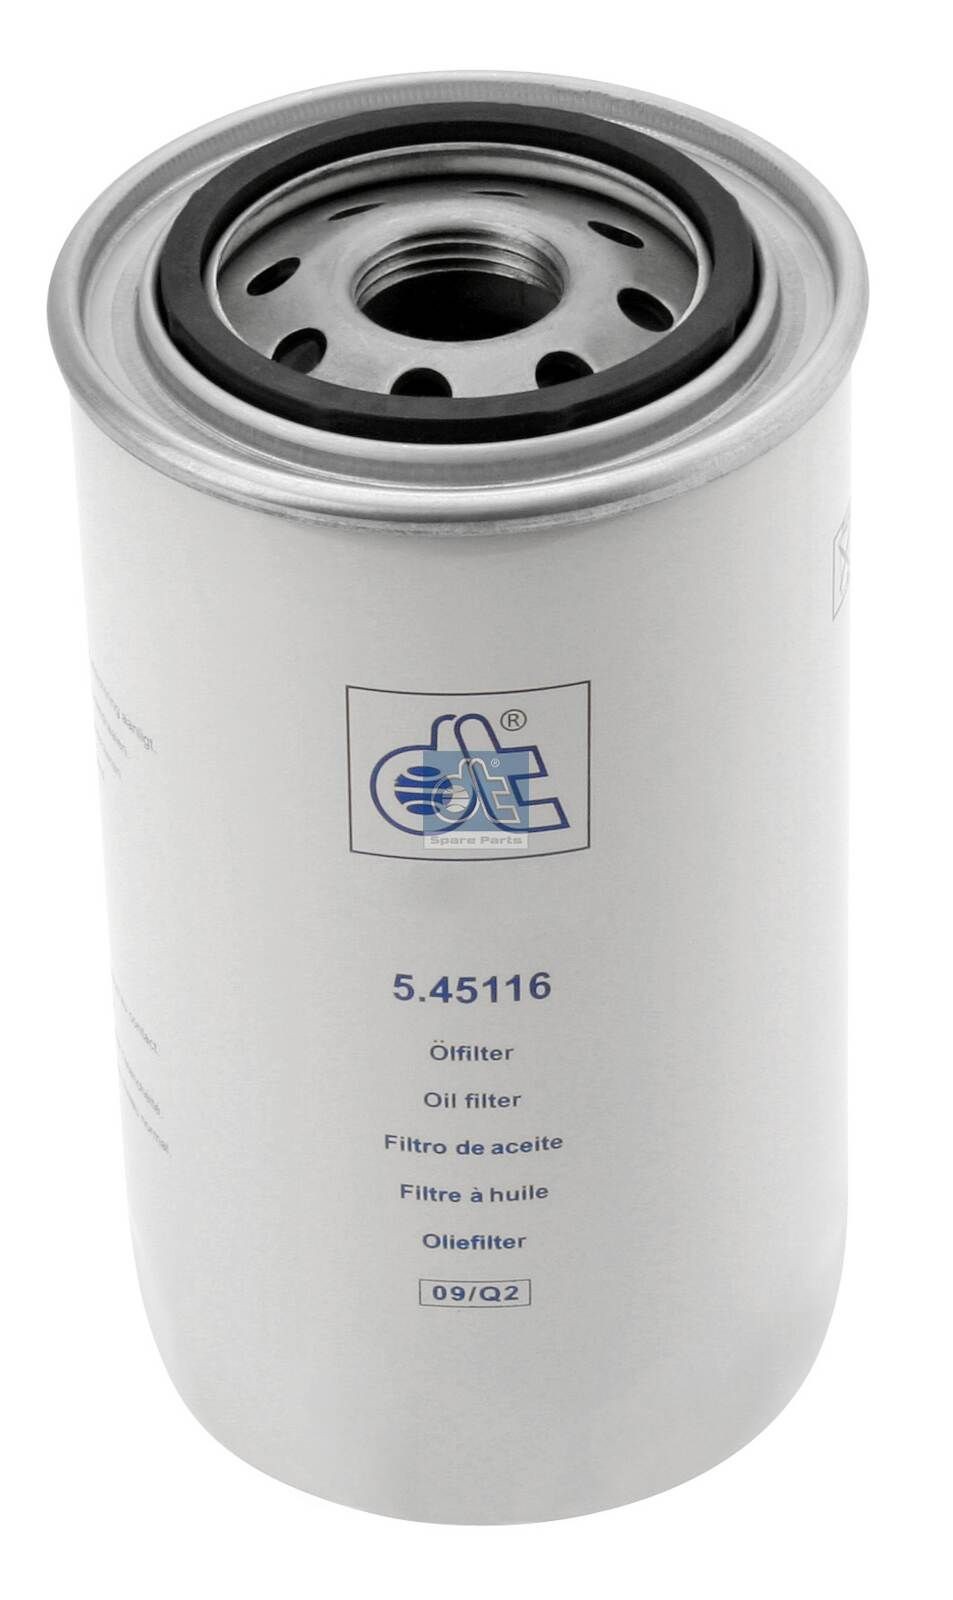 H19W10 DT Spare Parts 5.45116 Oil filter 2 513 616